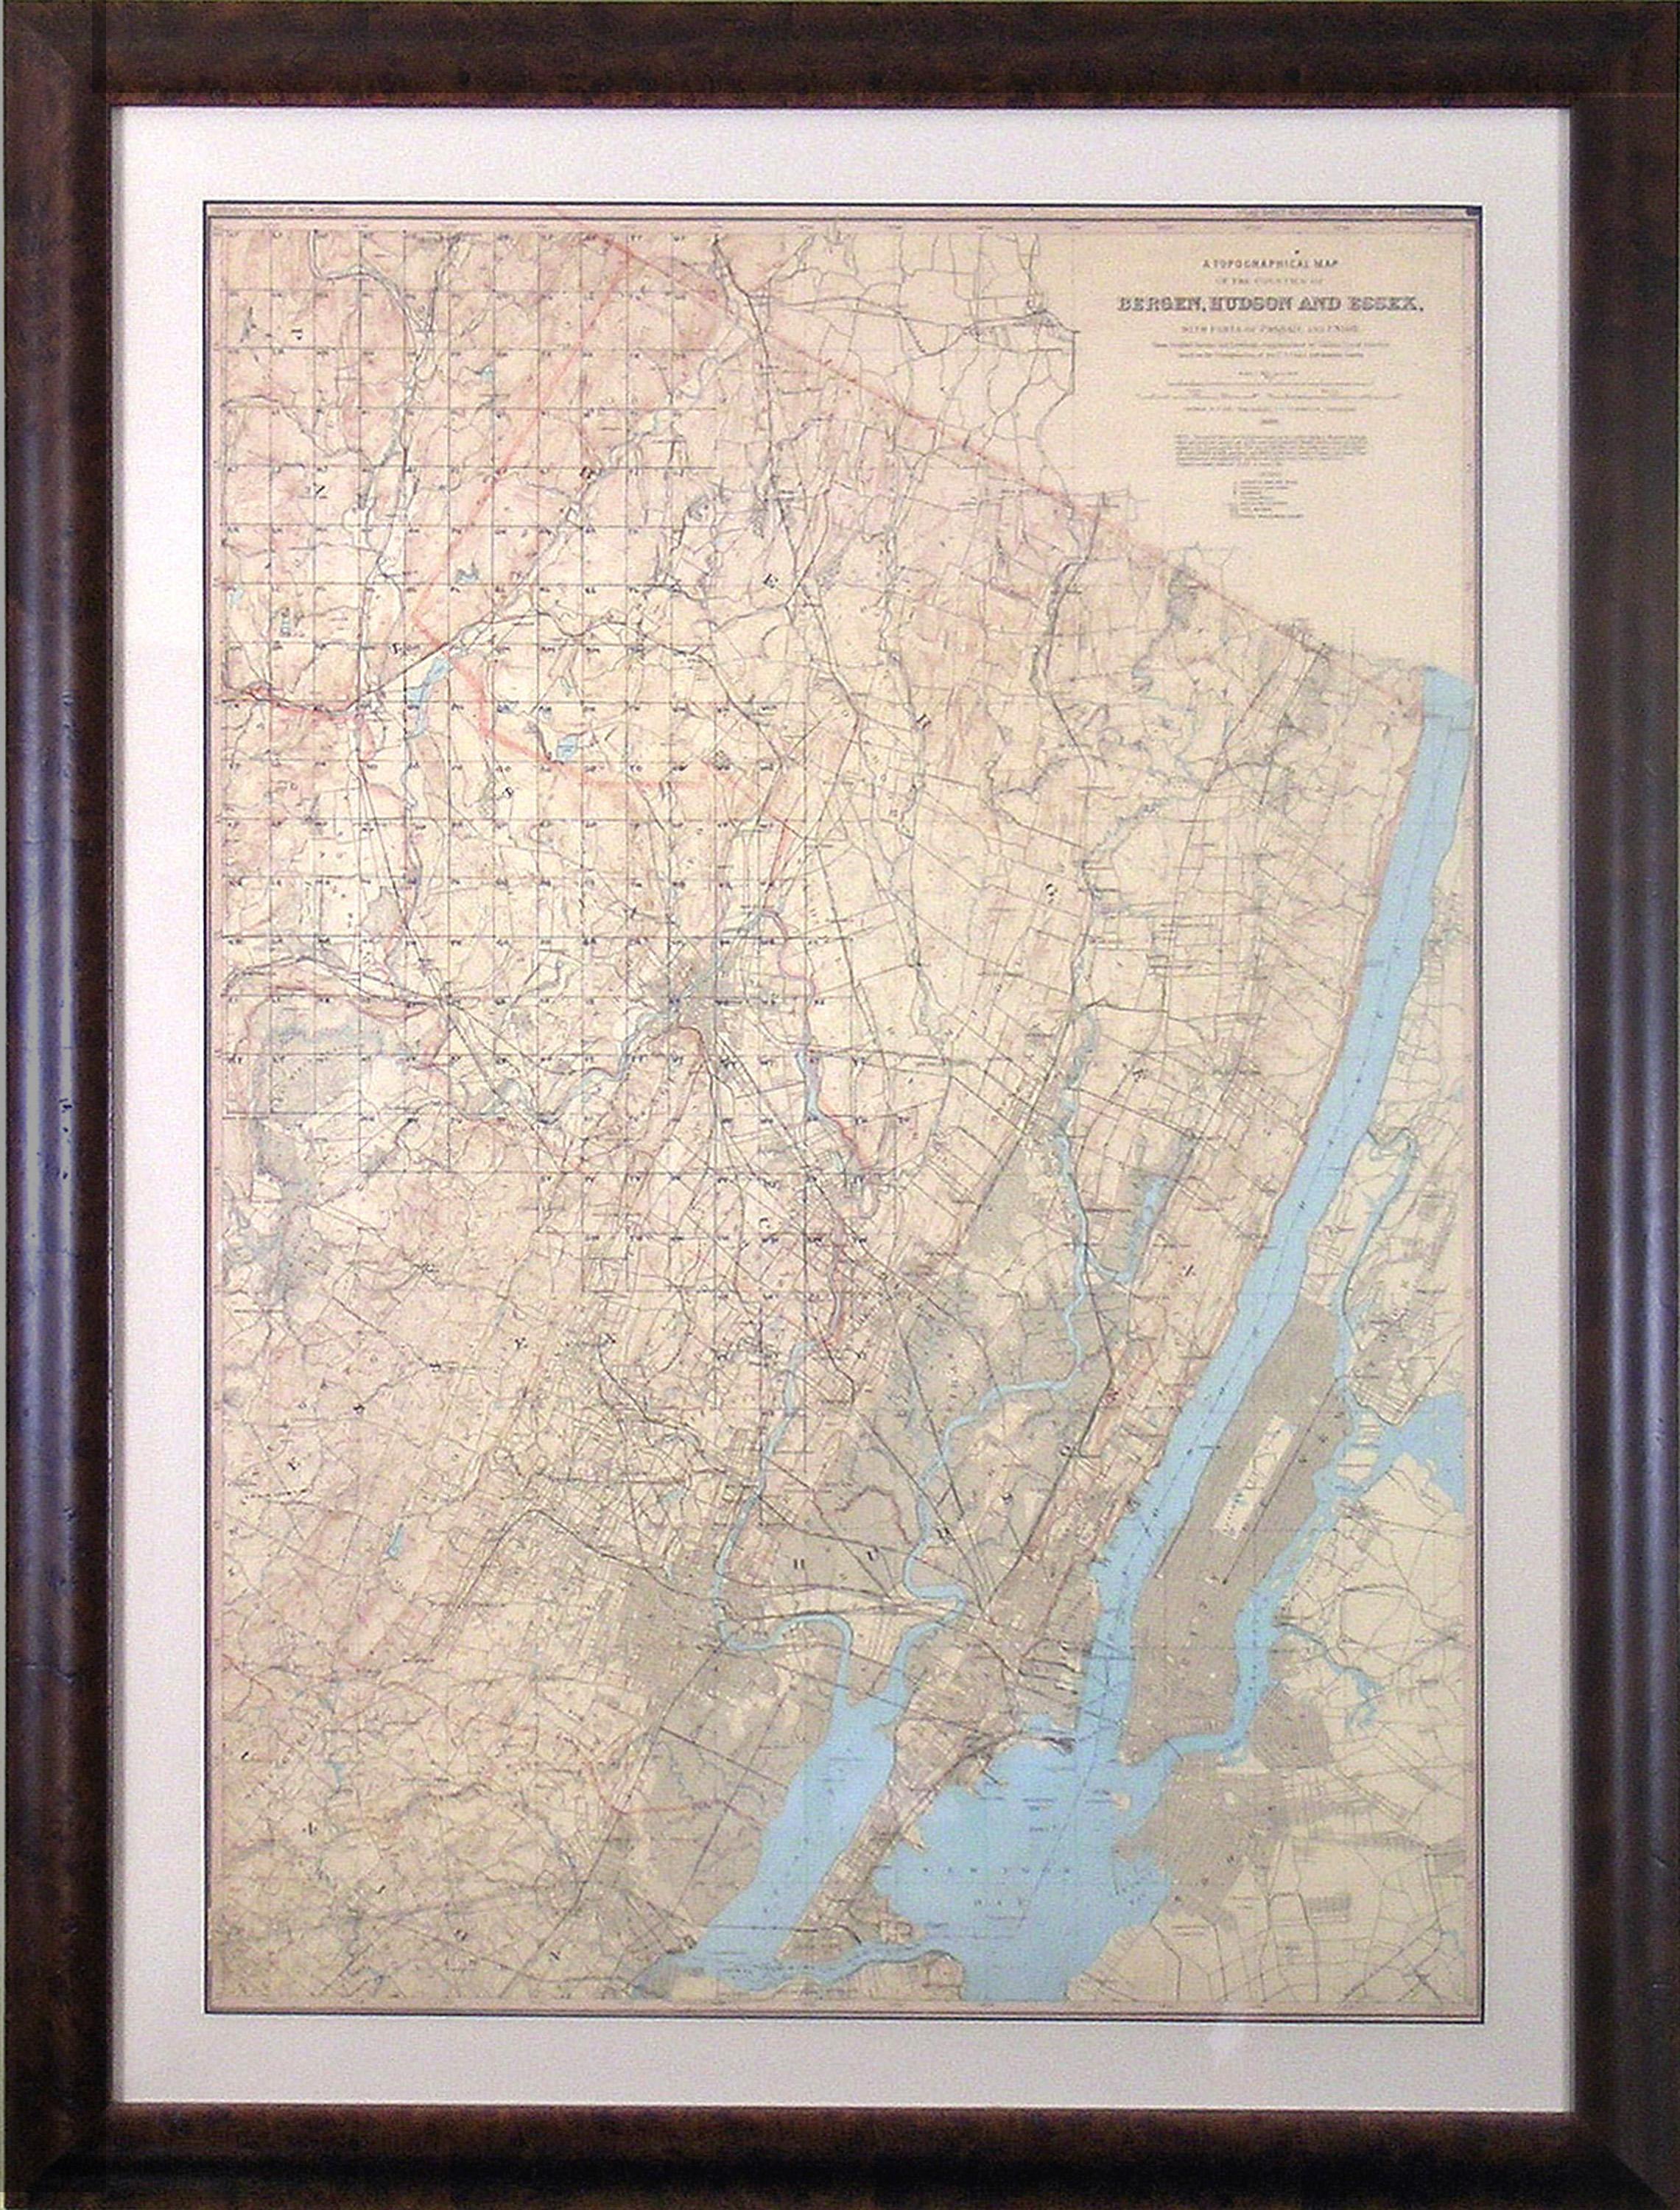 JULIUS BIEN (1826-1909)
Bien Atlas of New Jersey.
Geological Survey of New Jersey.
Chromolithography.
New York, 1883 - 1889
17 maps.  34” x 25” Paper Size.

	A lithographer and map engraver, Bien arrived in the United States in 1849.  Born in